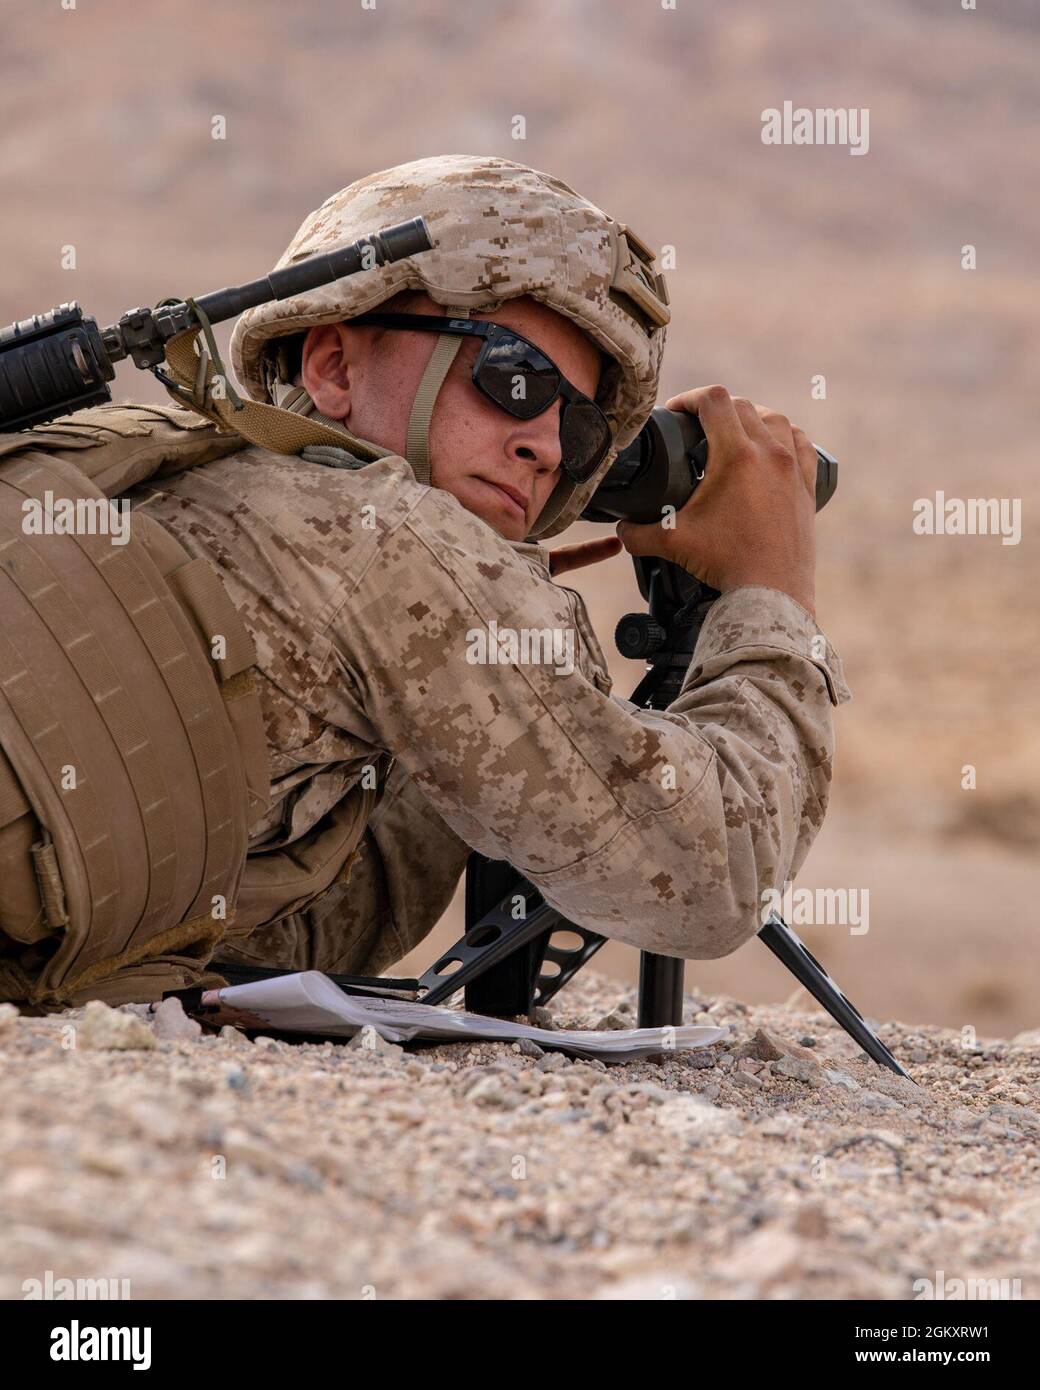 Lance Cpl. Reece Ackerman, a forward air observer with 3rd Battalion, 25th Marines observes targets during Fire Support Coordination Exercise (FSCEX) 1, a sub-event of Integrated Training Exercise (ITX) 4-21 at Marine Corps Air Ground Combat Center, Twentynine Palms, California on July 22, 2021. FSCEX allows Reserve Marines to coordinate various fires assets from across Marine Air Ground Task Force 25 to eliminate enemy positions in a simulated combat environment. Stock Photo